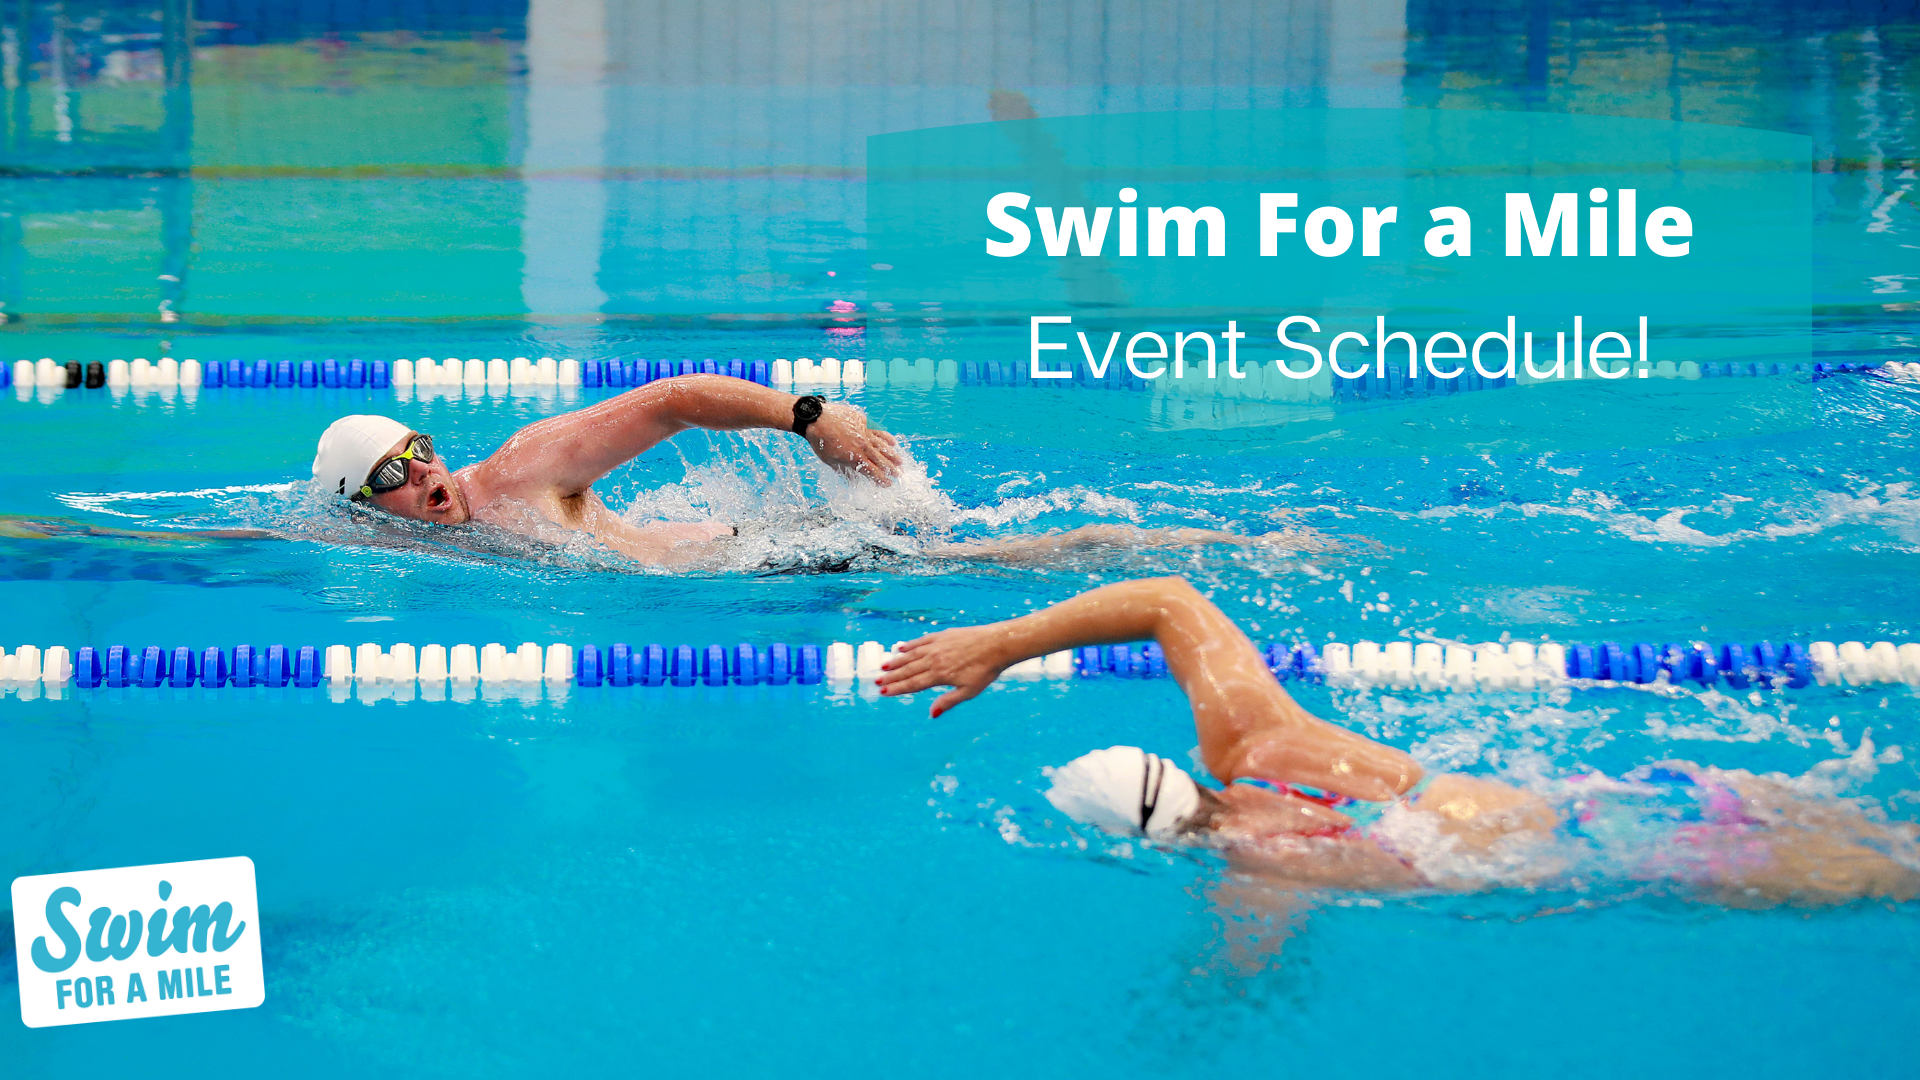 Full Swim For a Mile Event Schedule!